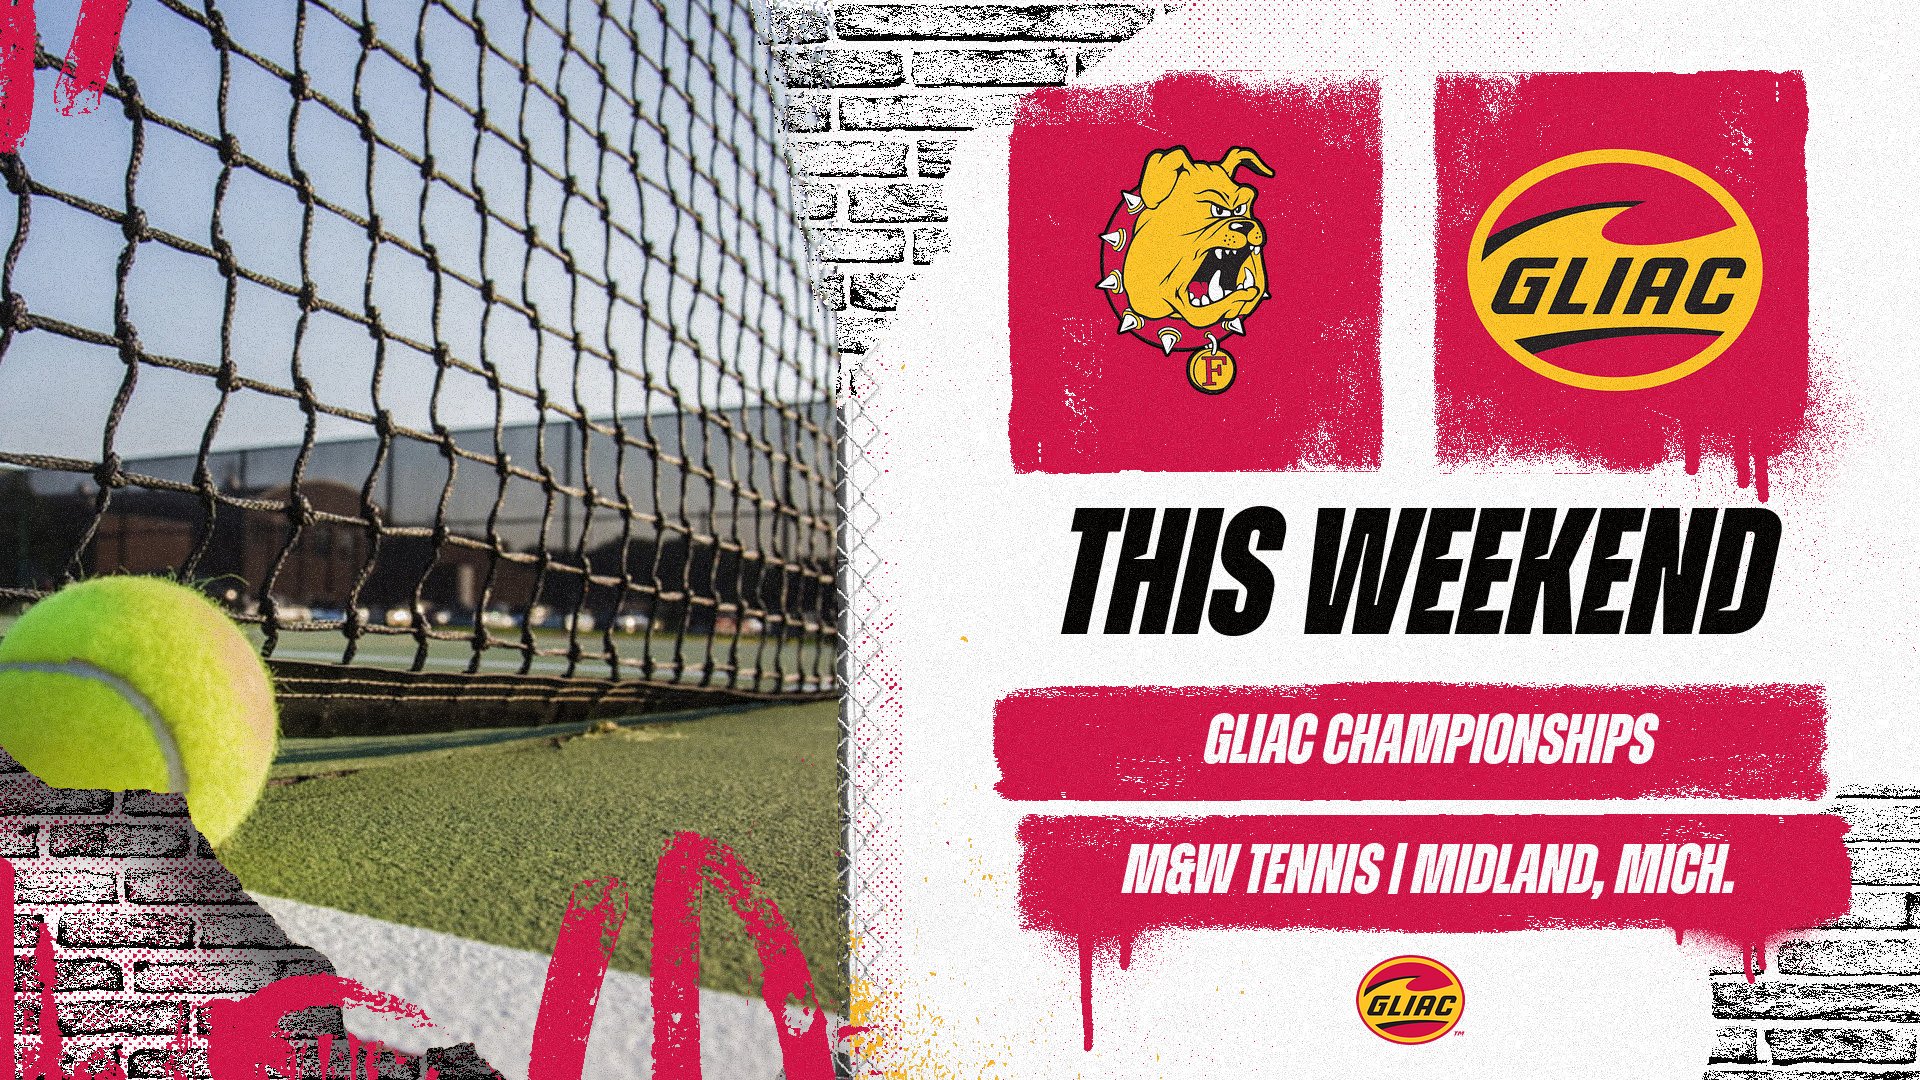 Ferris State Tennis Teams Earn First-Round Byes For GLIAC Tourney This Week